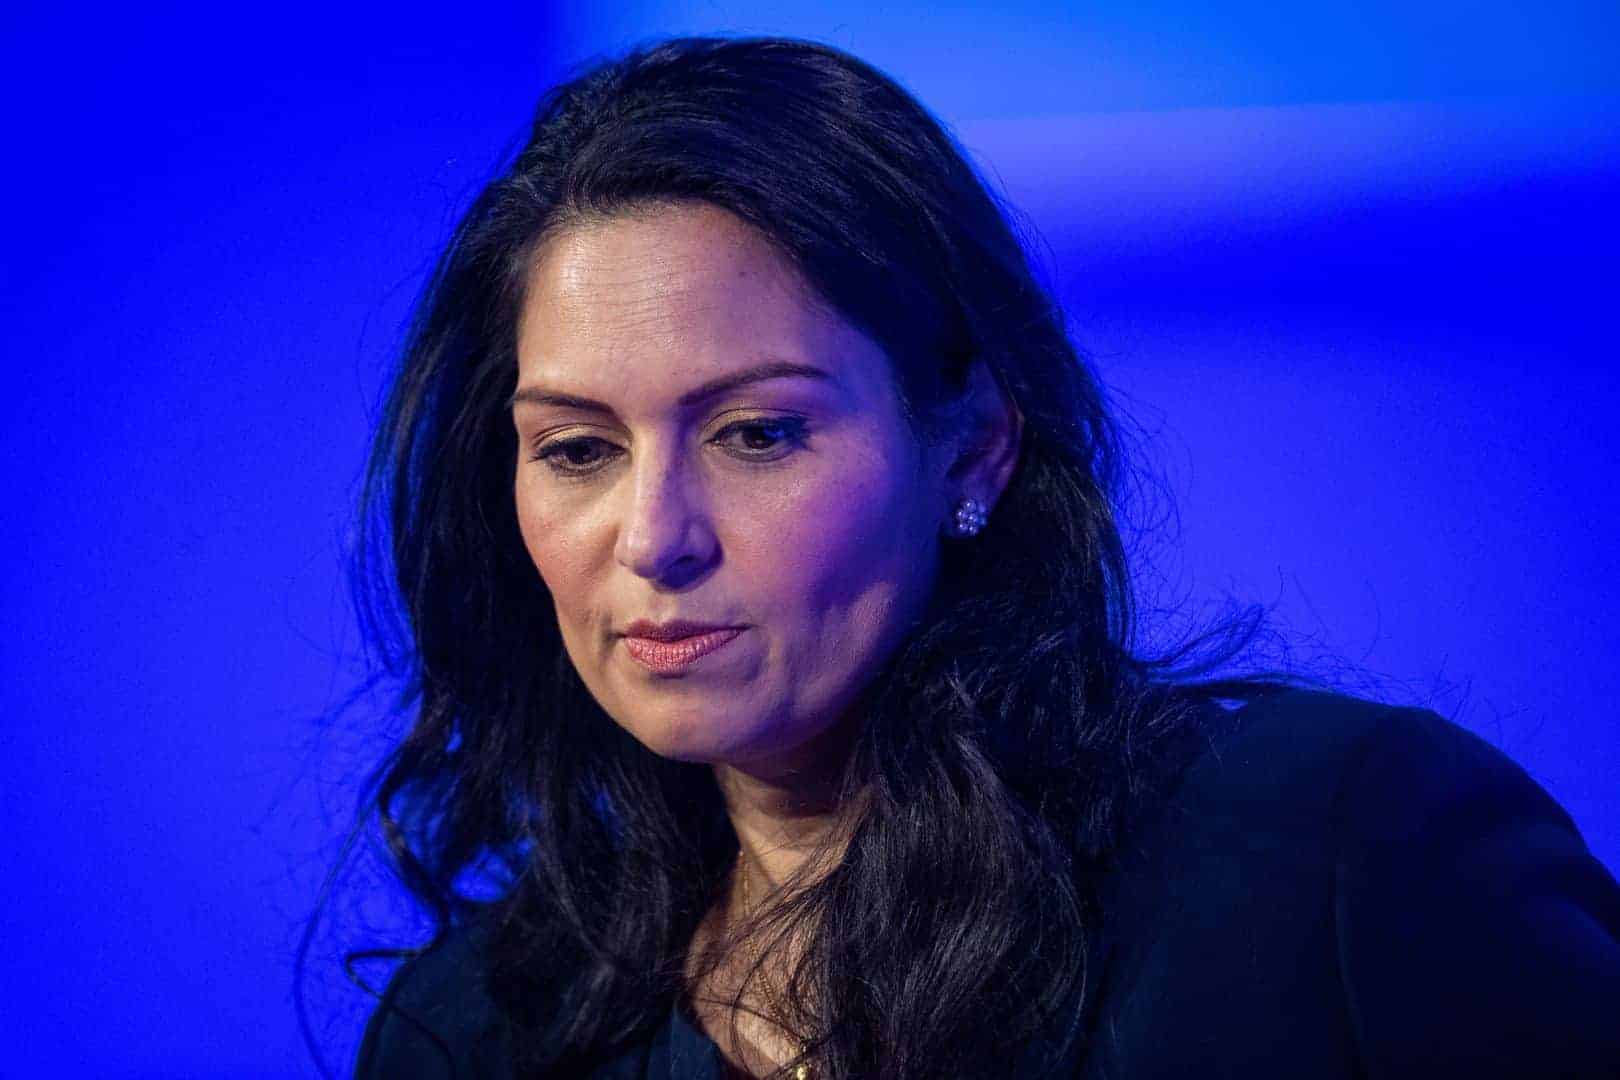 Priti Patel faces allegations of bullying staff in third department